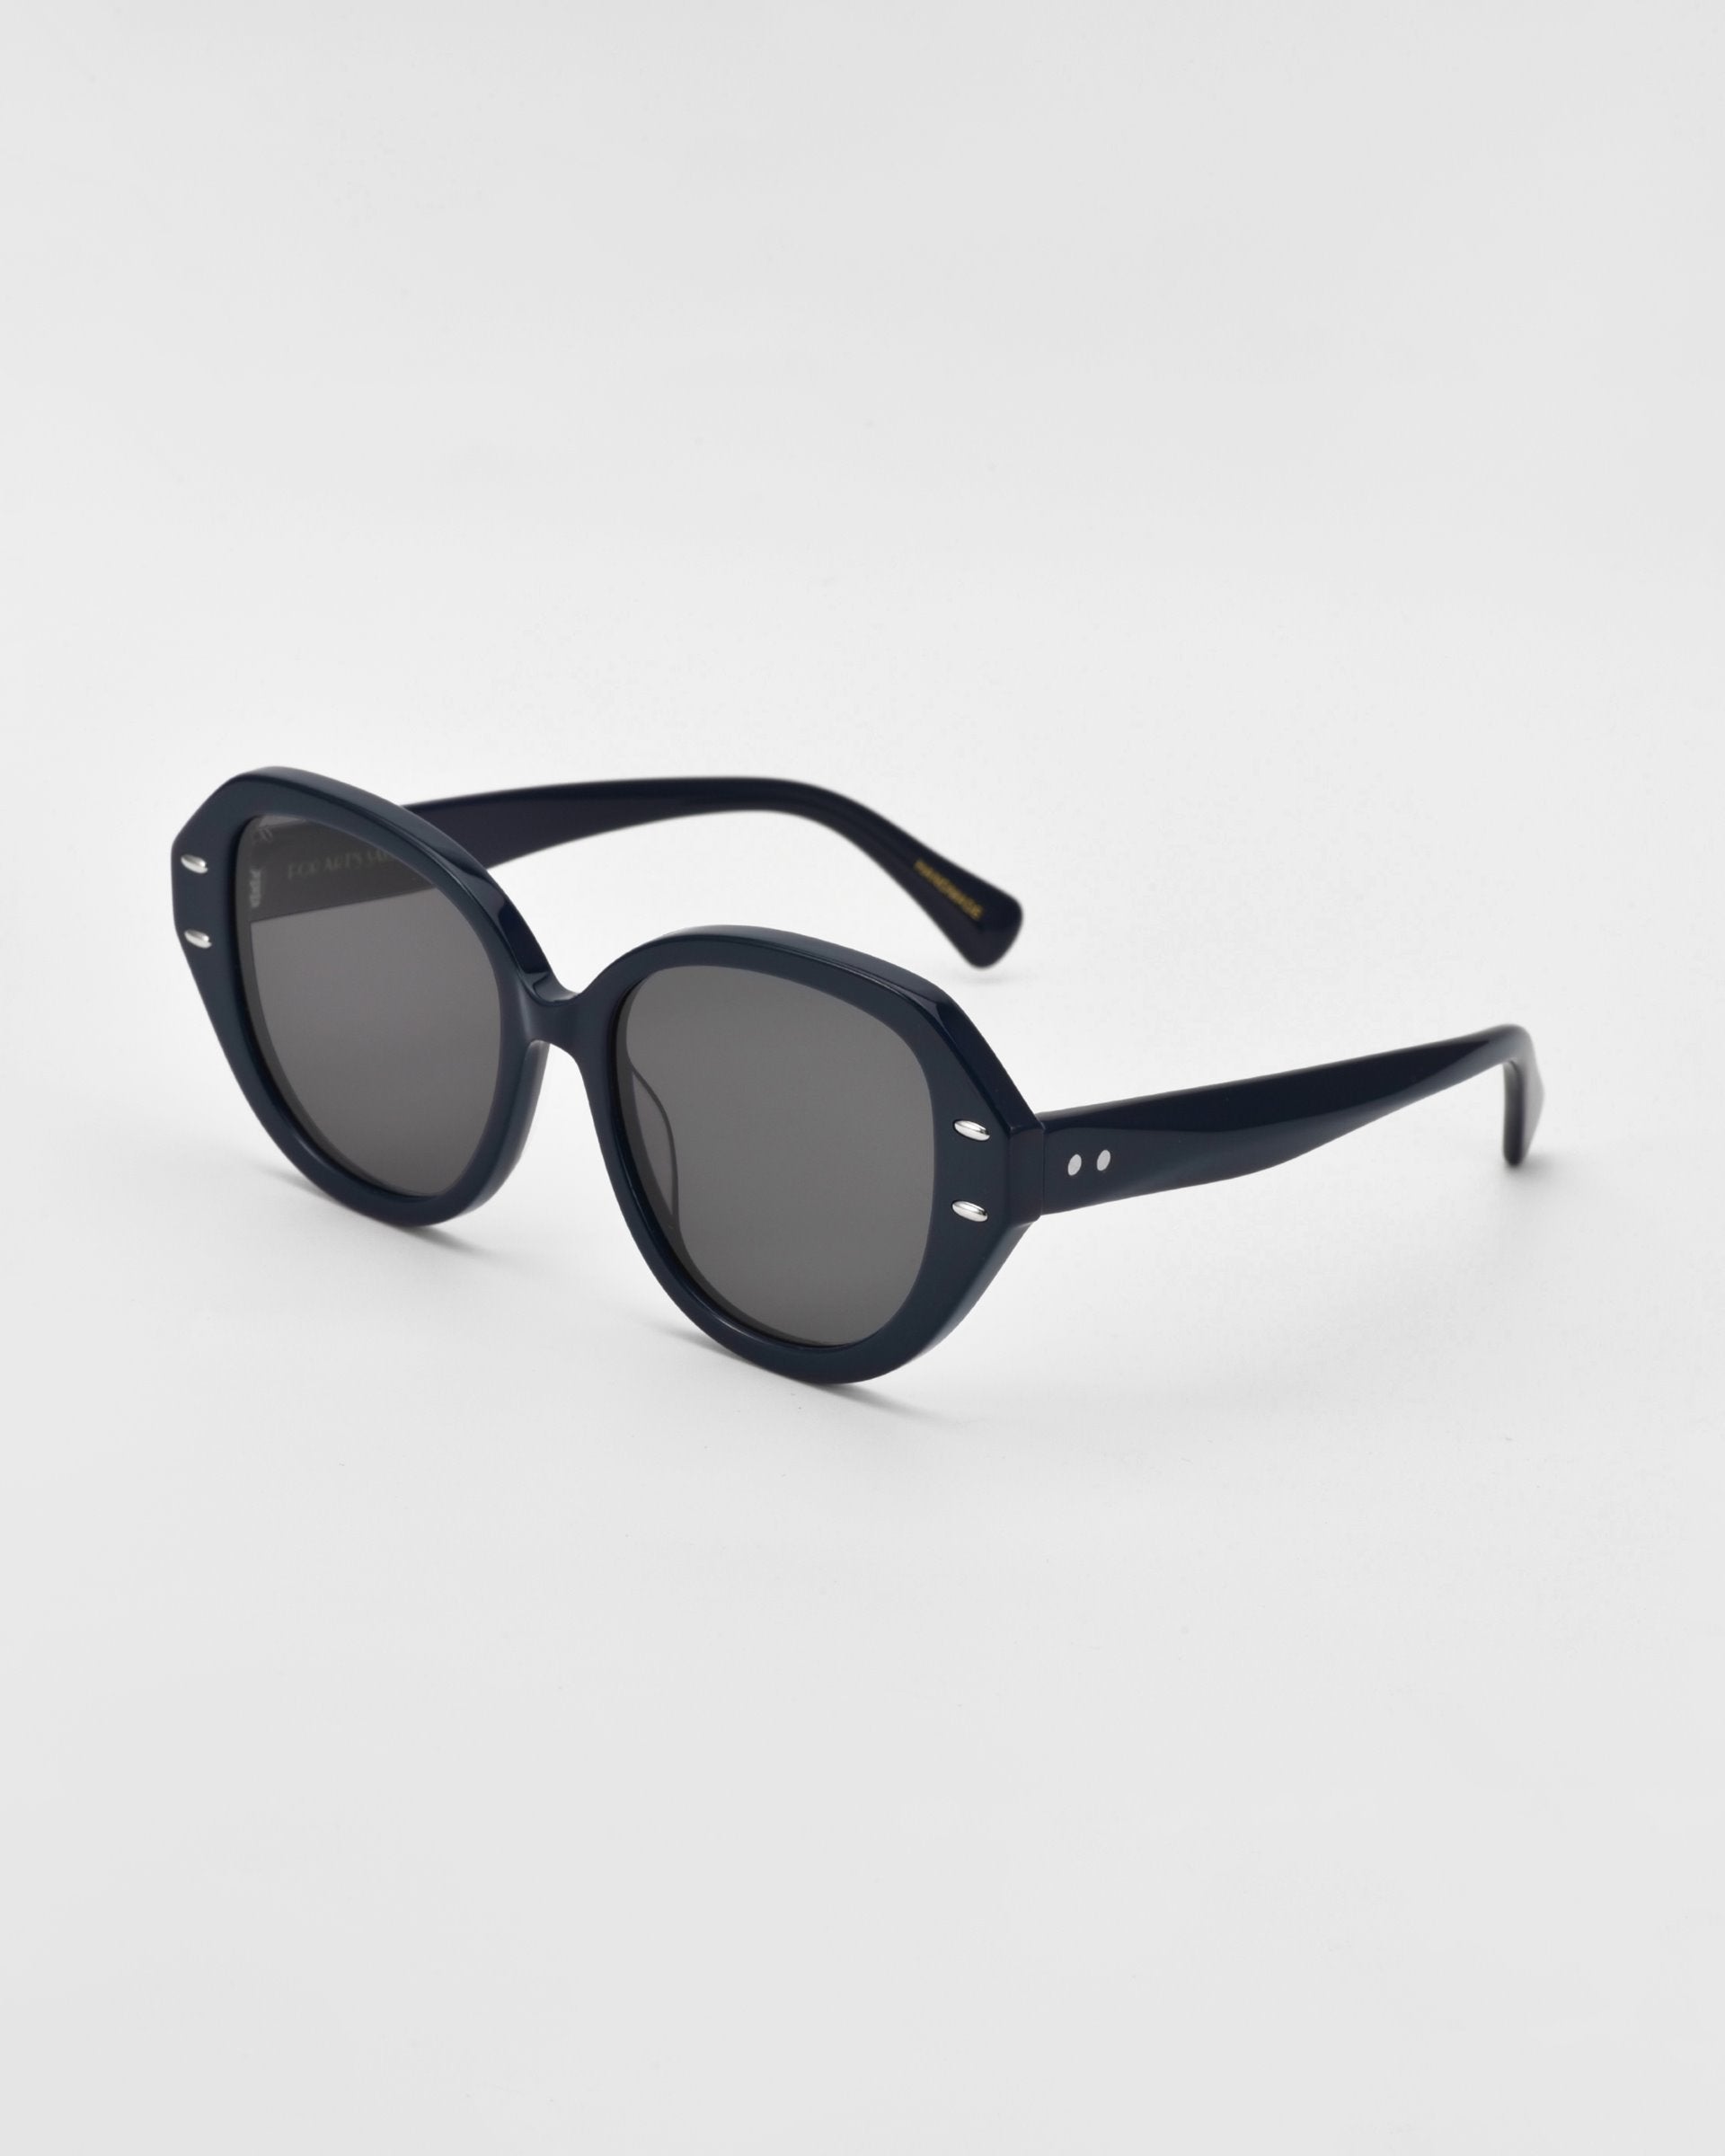 A pair of black, thick-framed cat-eye sunglasses with round lenses and small decorative silver dots near the hinges is positioned on a plain white background. The frames are crafted from plant-based acetate, adding an eco-friendly touch to this stylish accessory. These are the Mirage by For Art's Sake®.